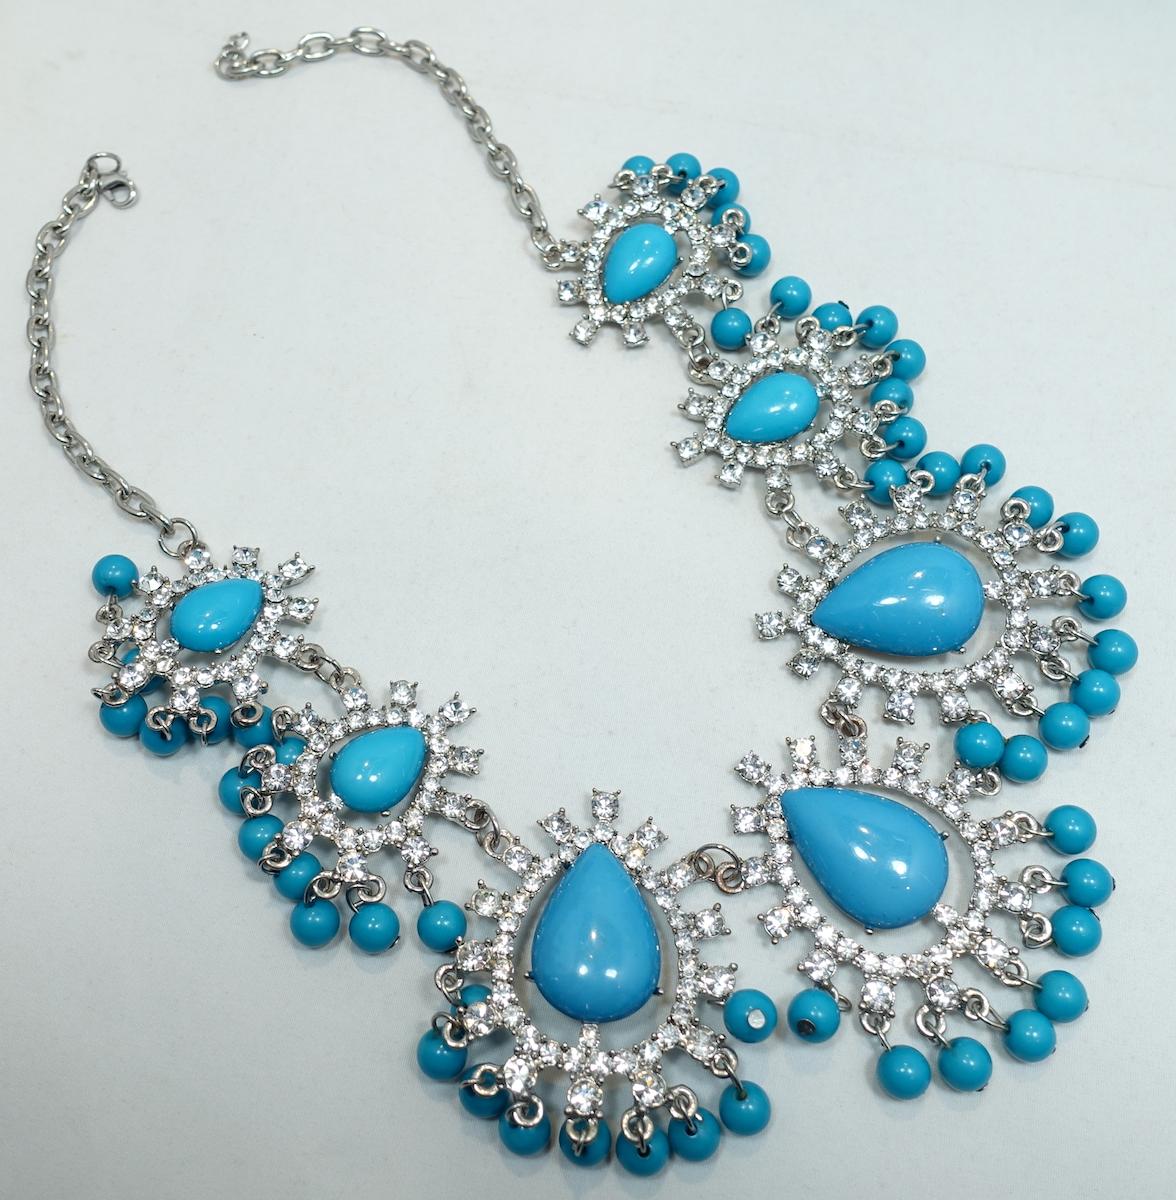 Faux Turquoise & Clear Crystals Bib Necklace In Good Condition For Sale In New York, NY